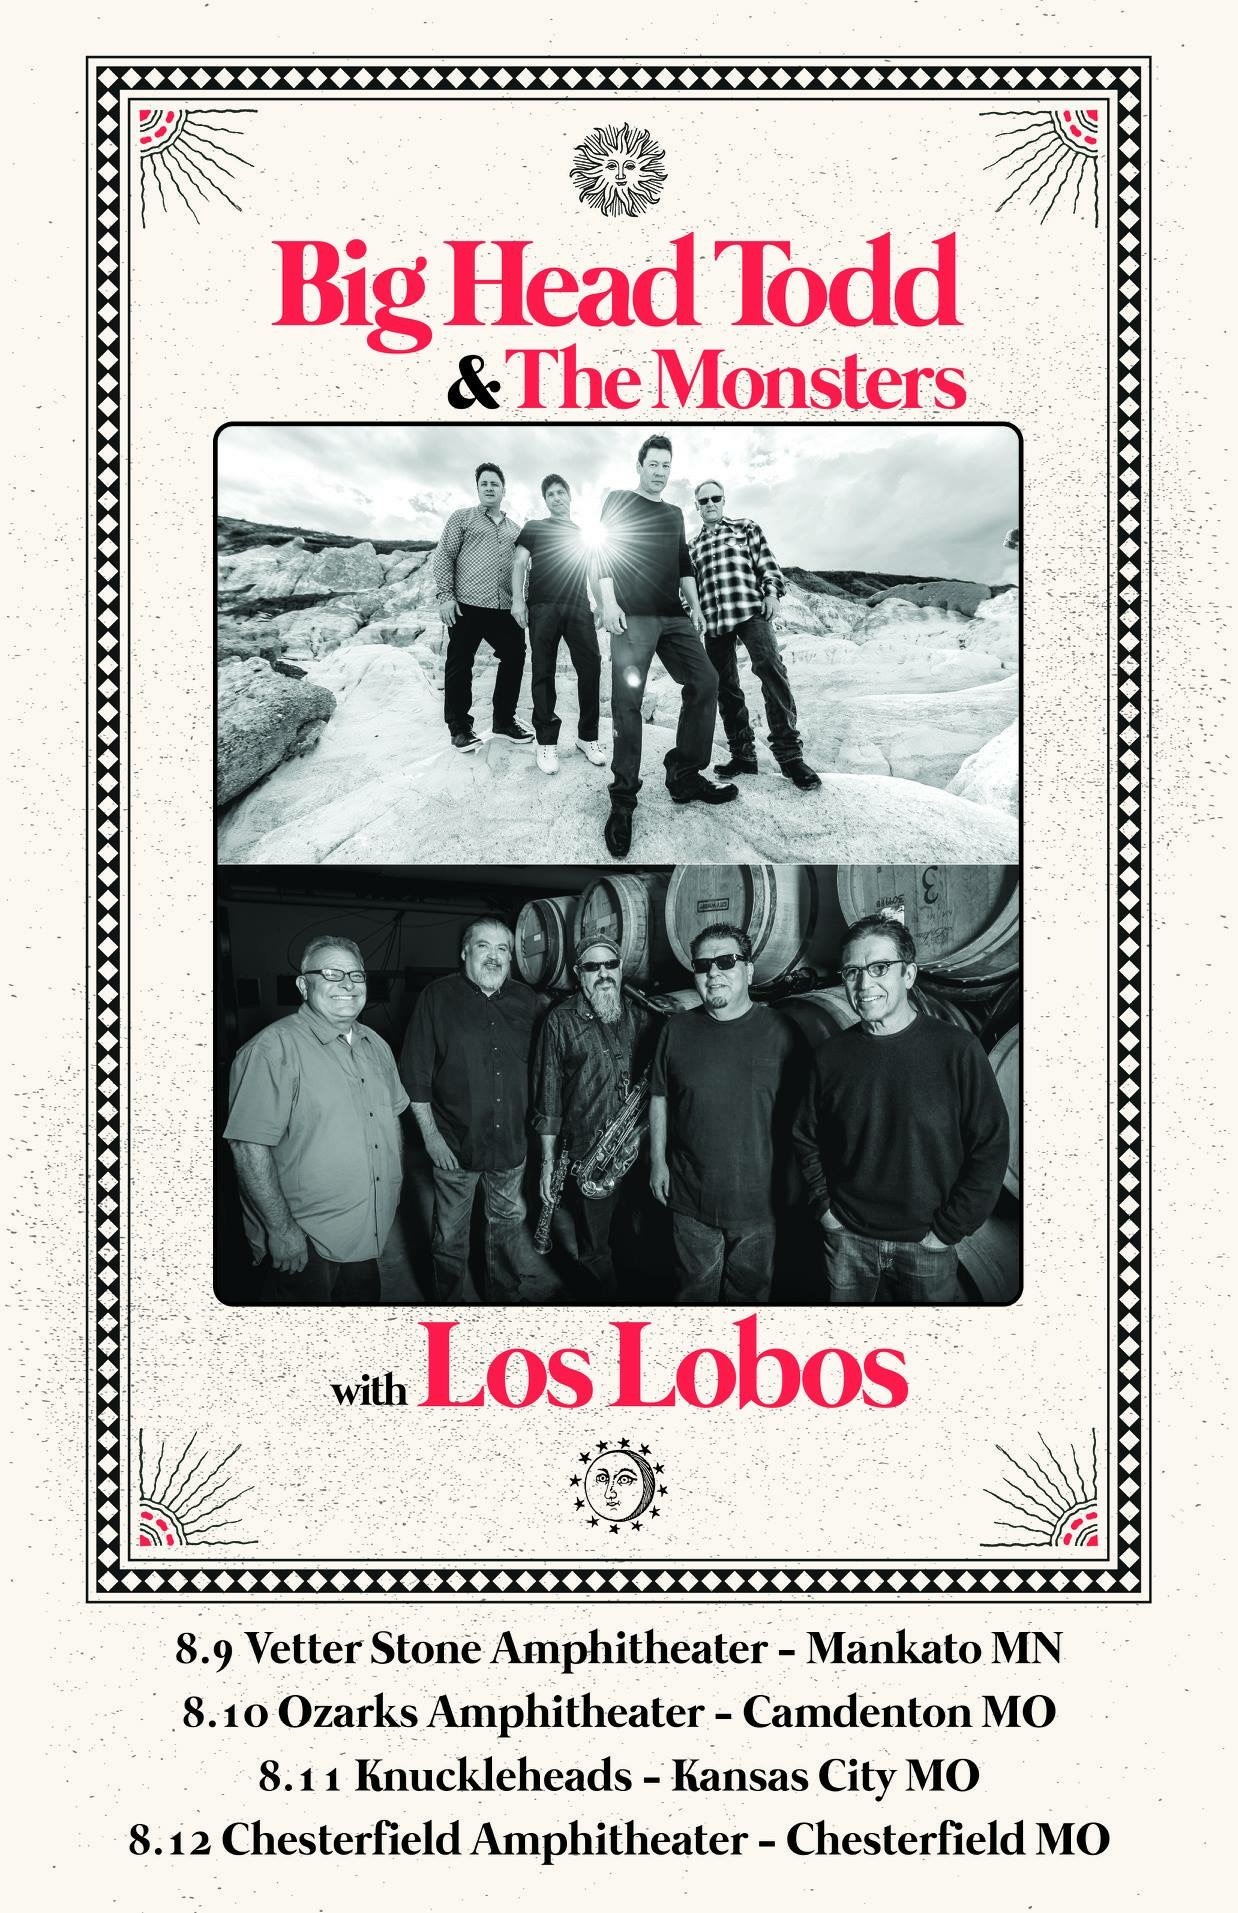 Big Head Todd hitting the road with Los Lobos this summer! Tickets on sale Fri. May 4th! 